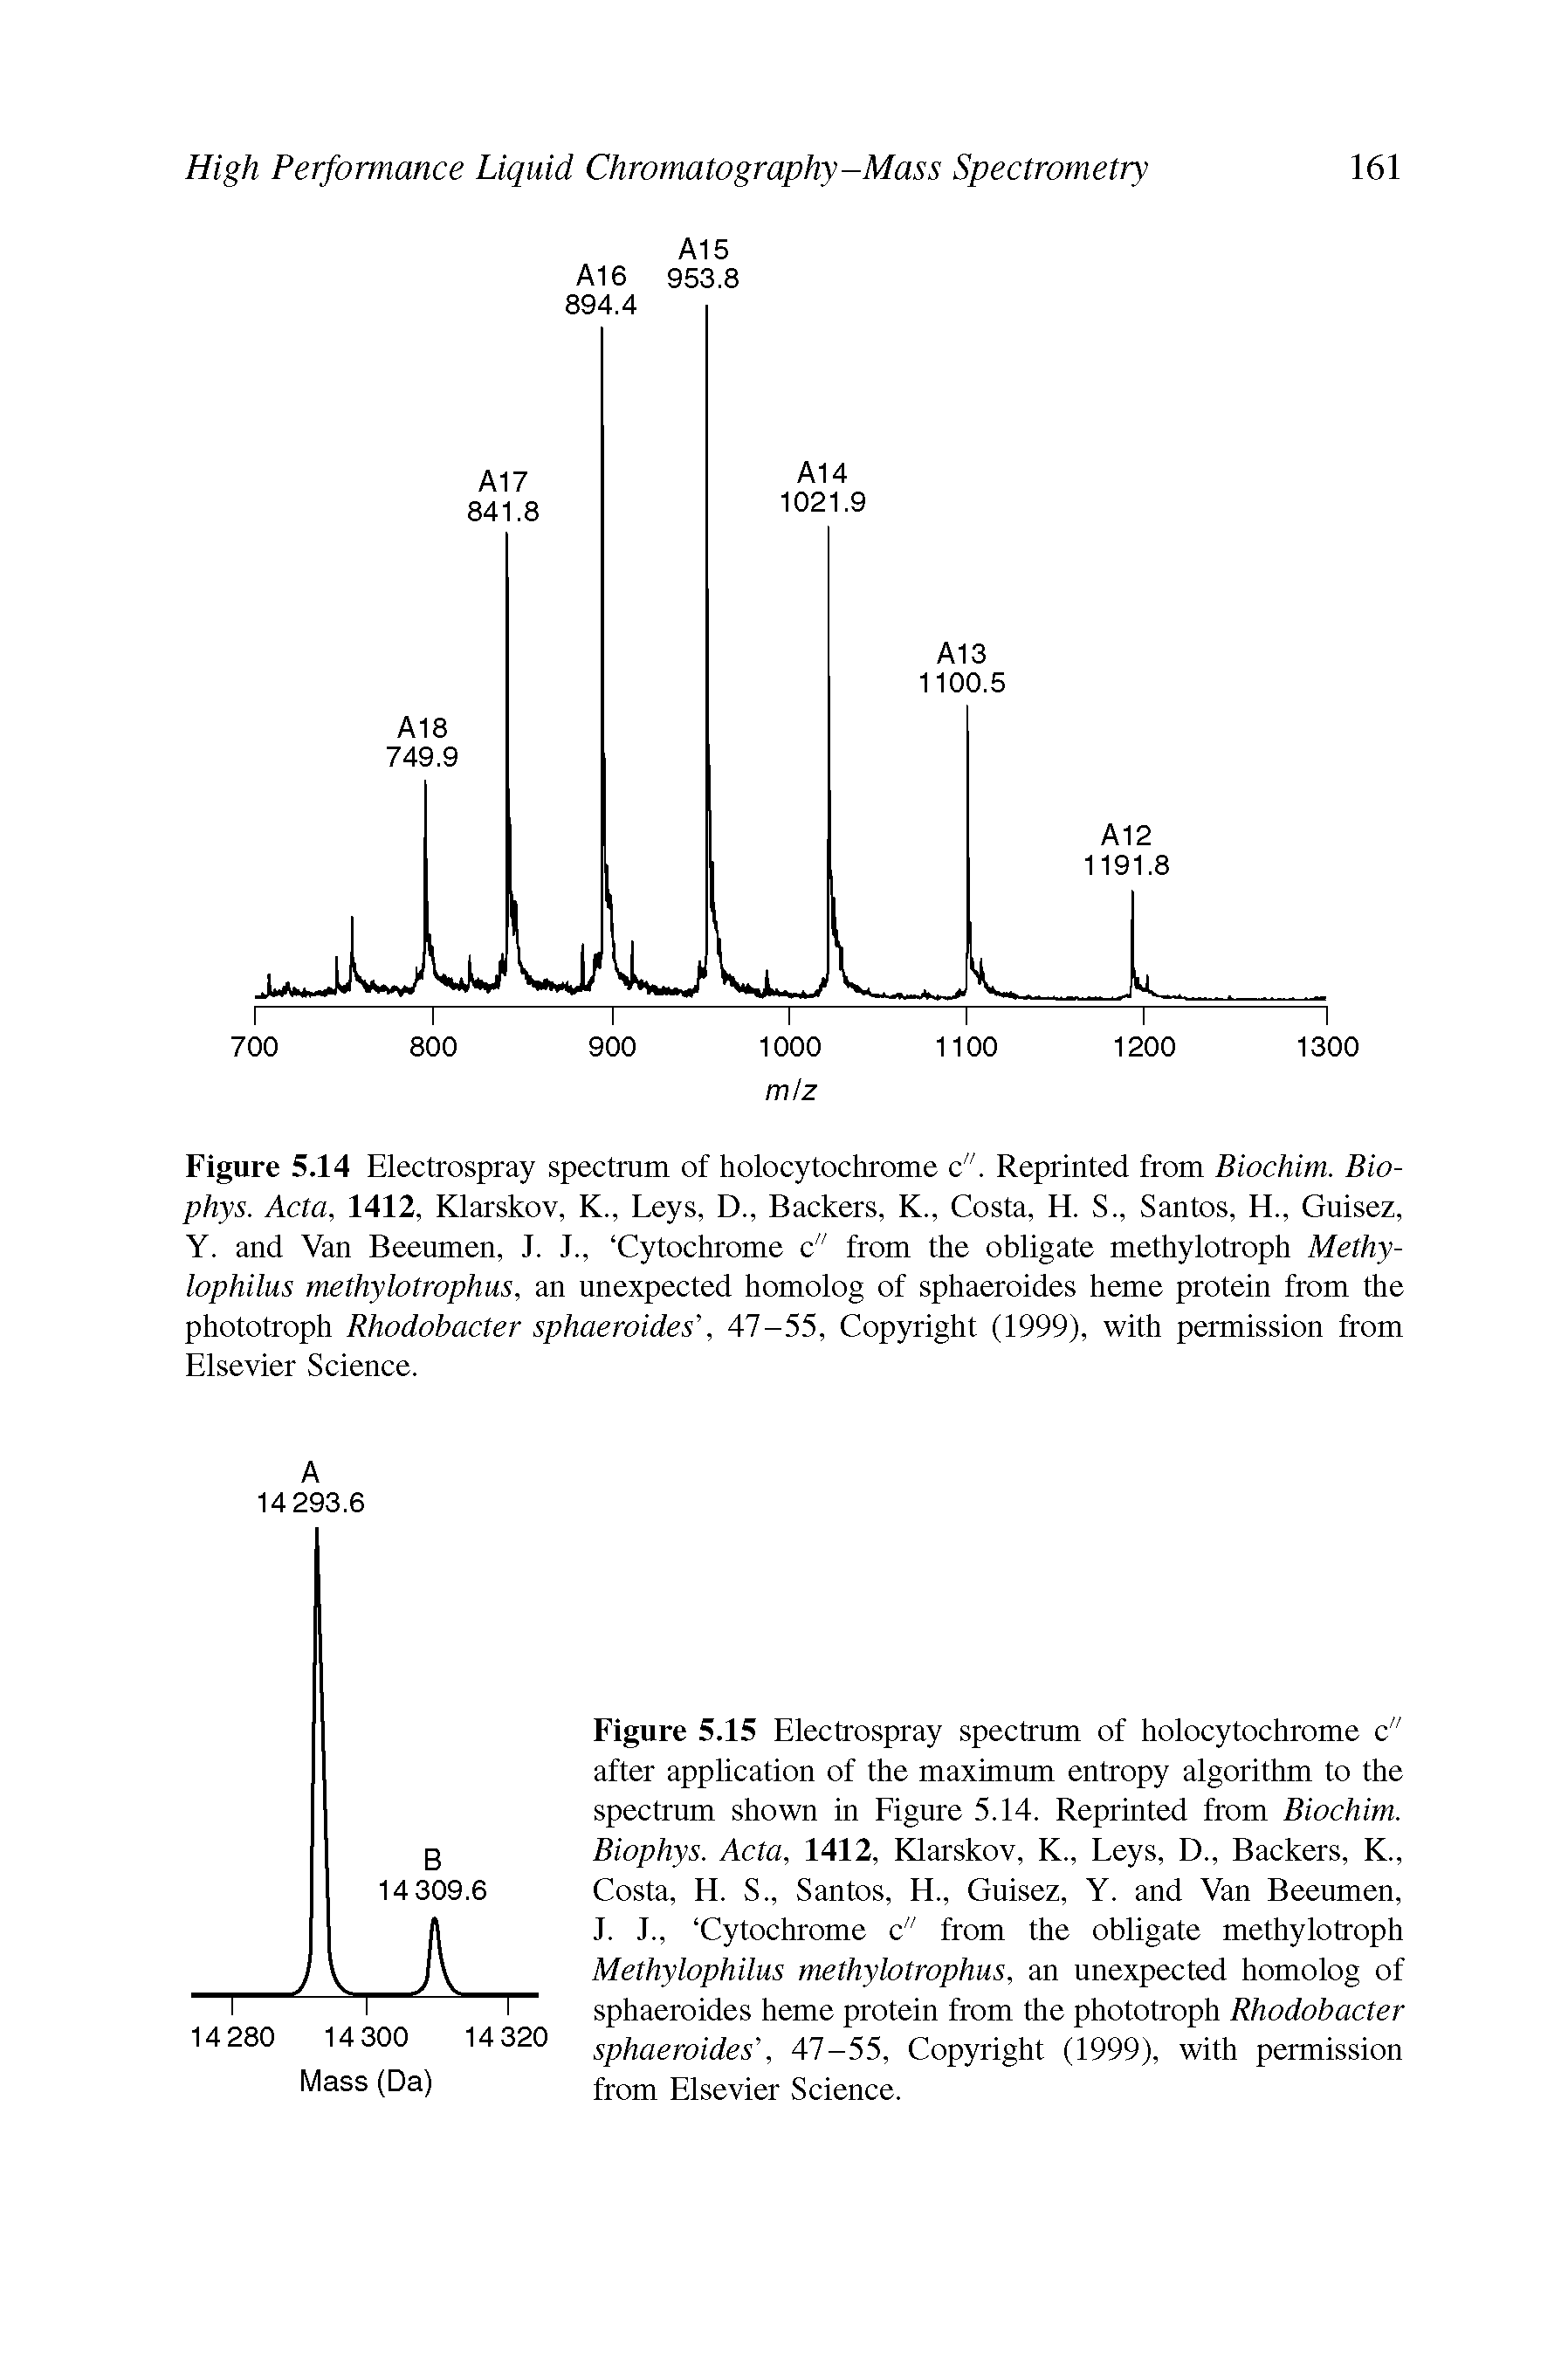 Figure 5.14 Electrospray spectrum of holocytochrome c". Reprinted from Biochim. Bio-phys. Acta, 1412, Klarskov, K., Leys, D., Backers, K., Costa, H. S., Santos, H., Guisez, Y. and Van Beeumen, 1. 1., Cytochrome c" from the obligate methylotroph Methy-lophilus methylotrophus, an unexpected homolog of sphaeroides heme protein from the phototroph Rhodobacter sphaeroides", 47-55, Copyright (1999), with permission from Elsevier Science.